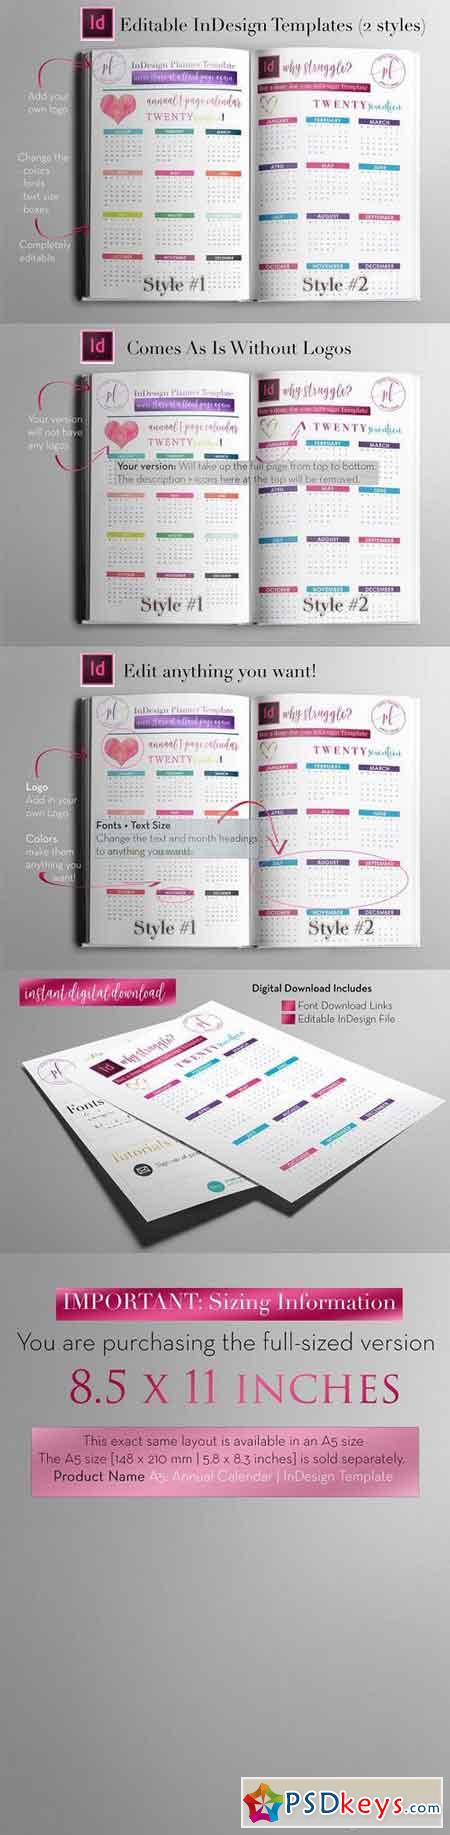 Annual Calendar InDesign Template 1113017 Free Download Photoshop